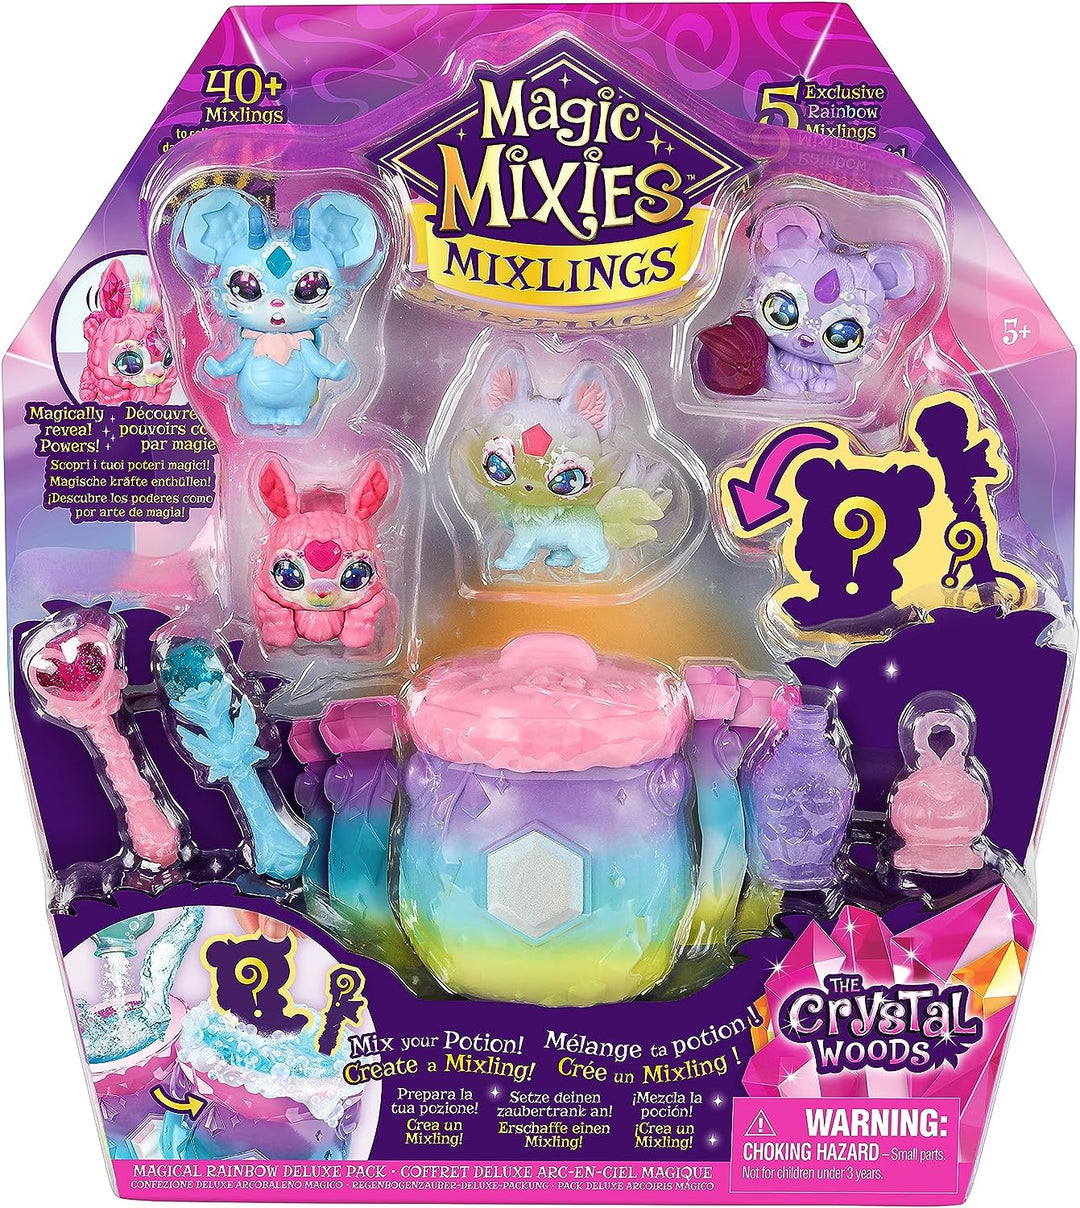 Magic Mixies Mixlings Magical Rainbow Deluxe Pack Contains 5 Exclusive Mixlings